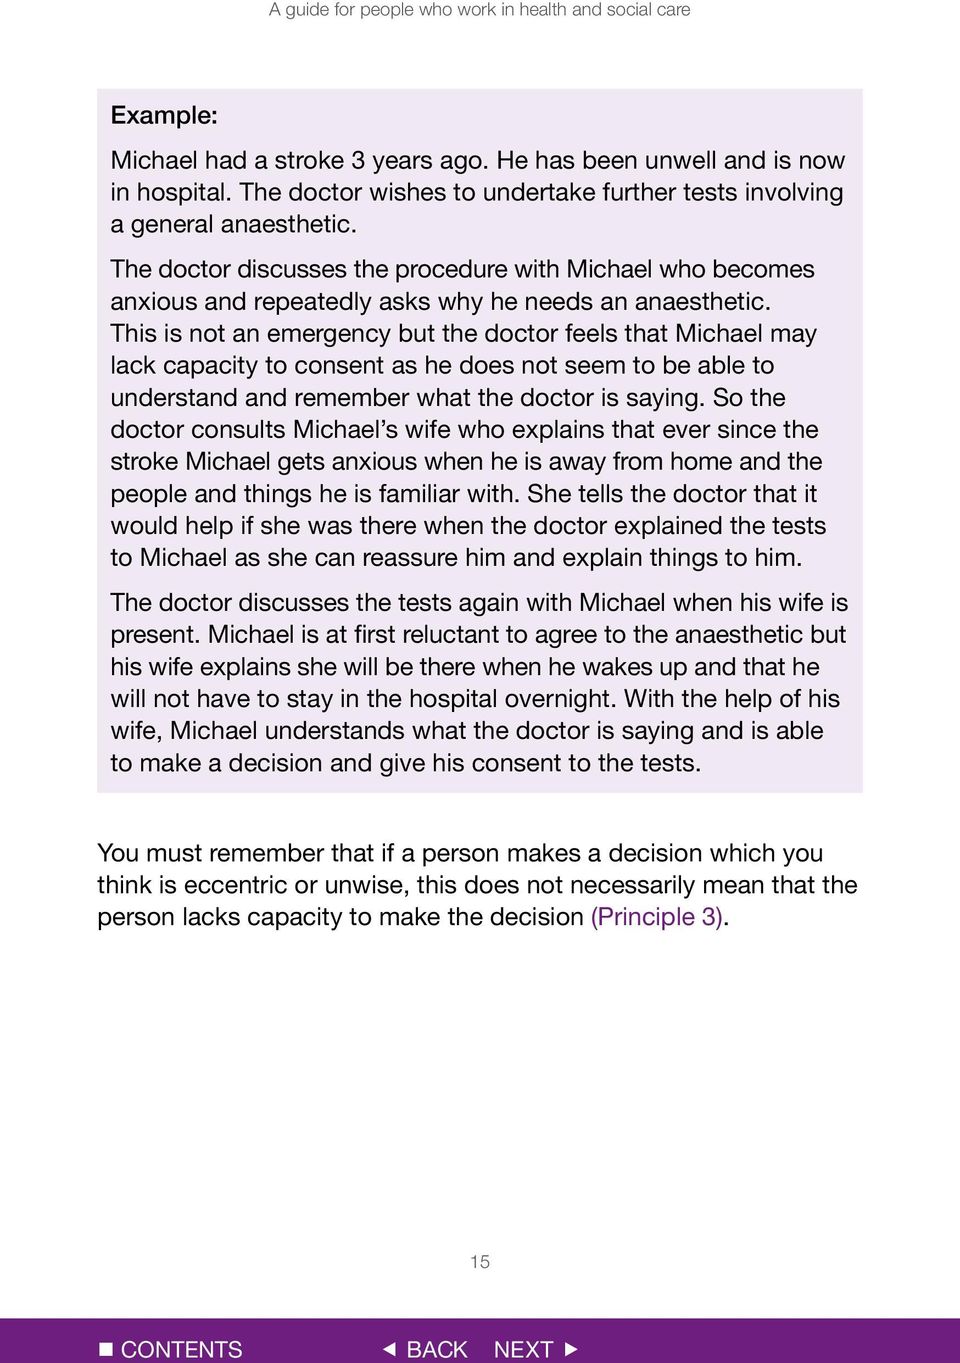 This is not an emergency but the doctor feels that Michael may lack capacity to consent as he does not seem to be able to understand and remember what the doctor is saying.